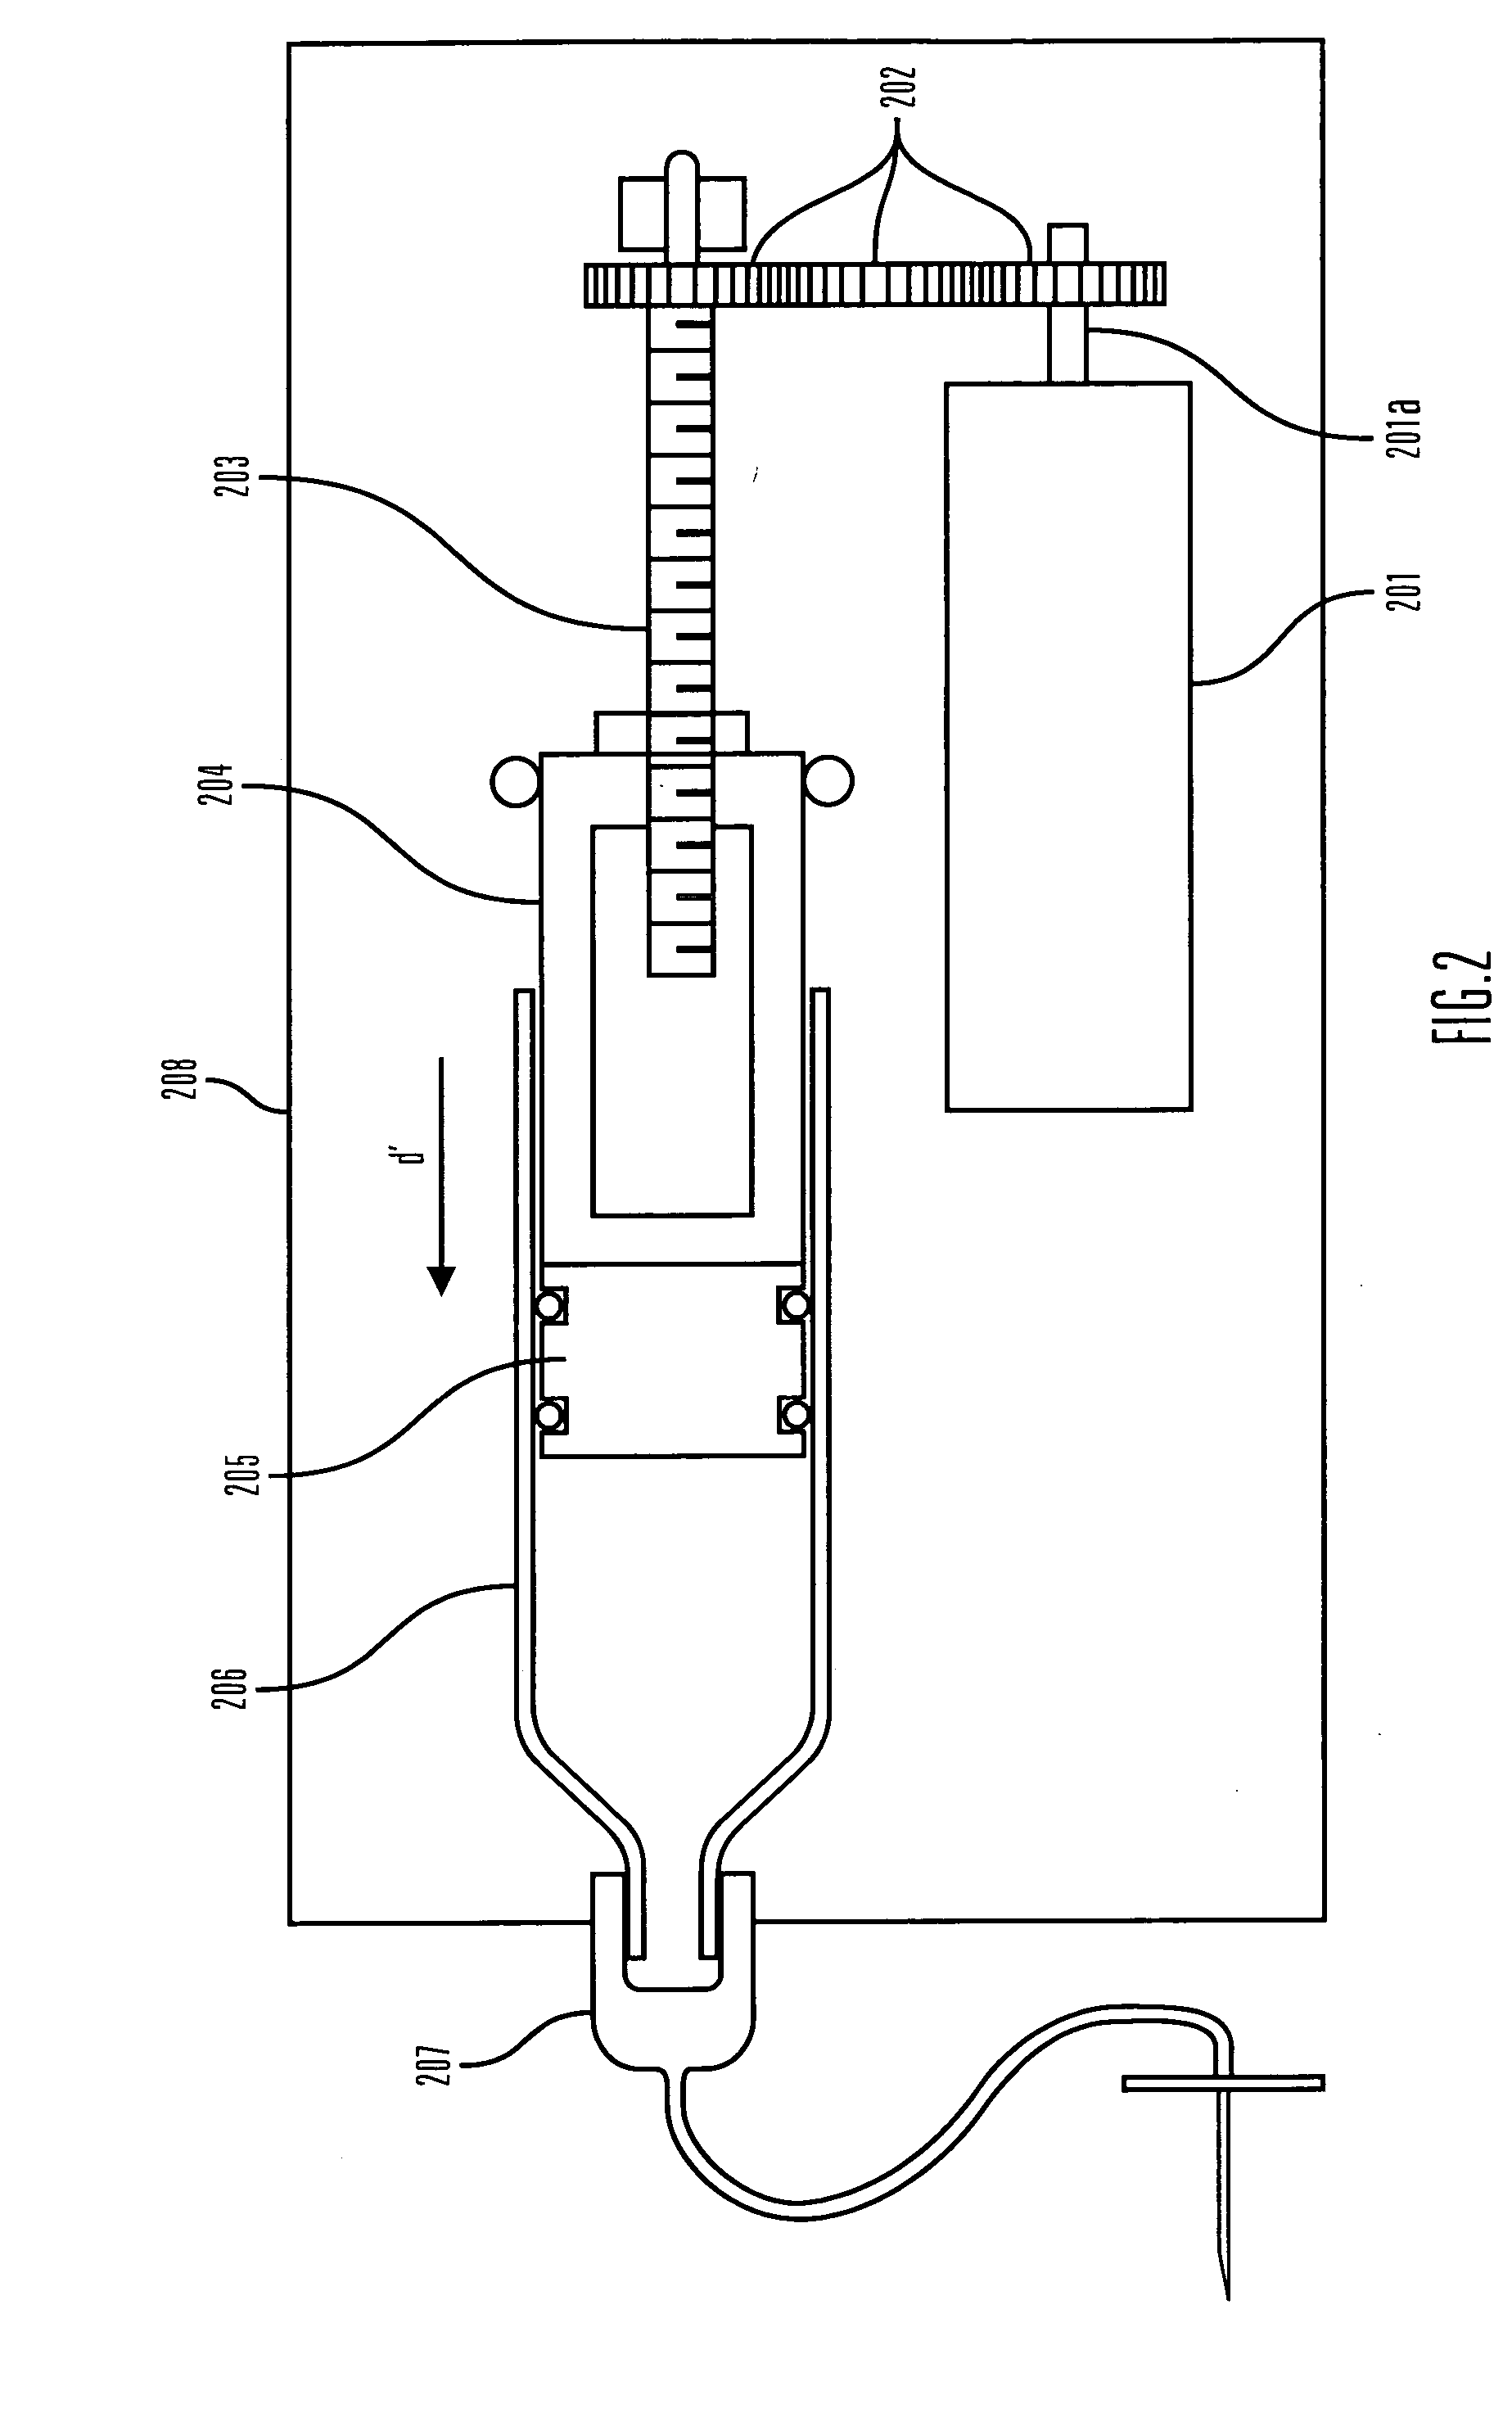 Fluid reservoir for use with an external infusion device